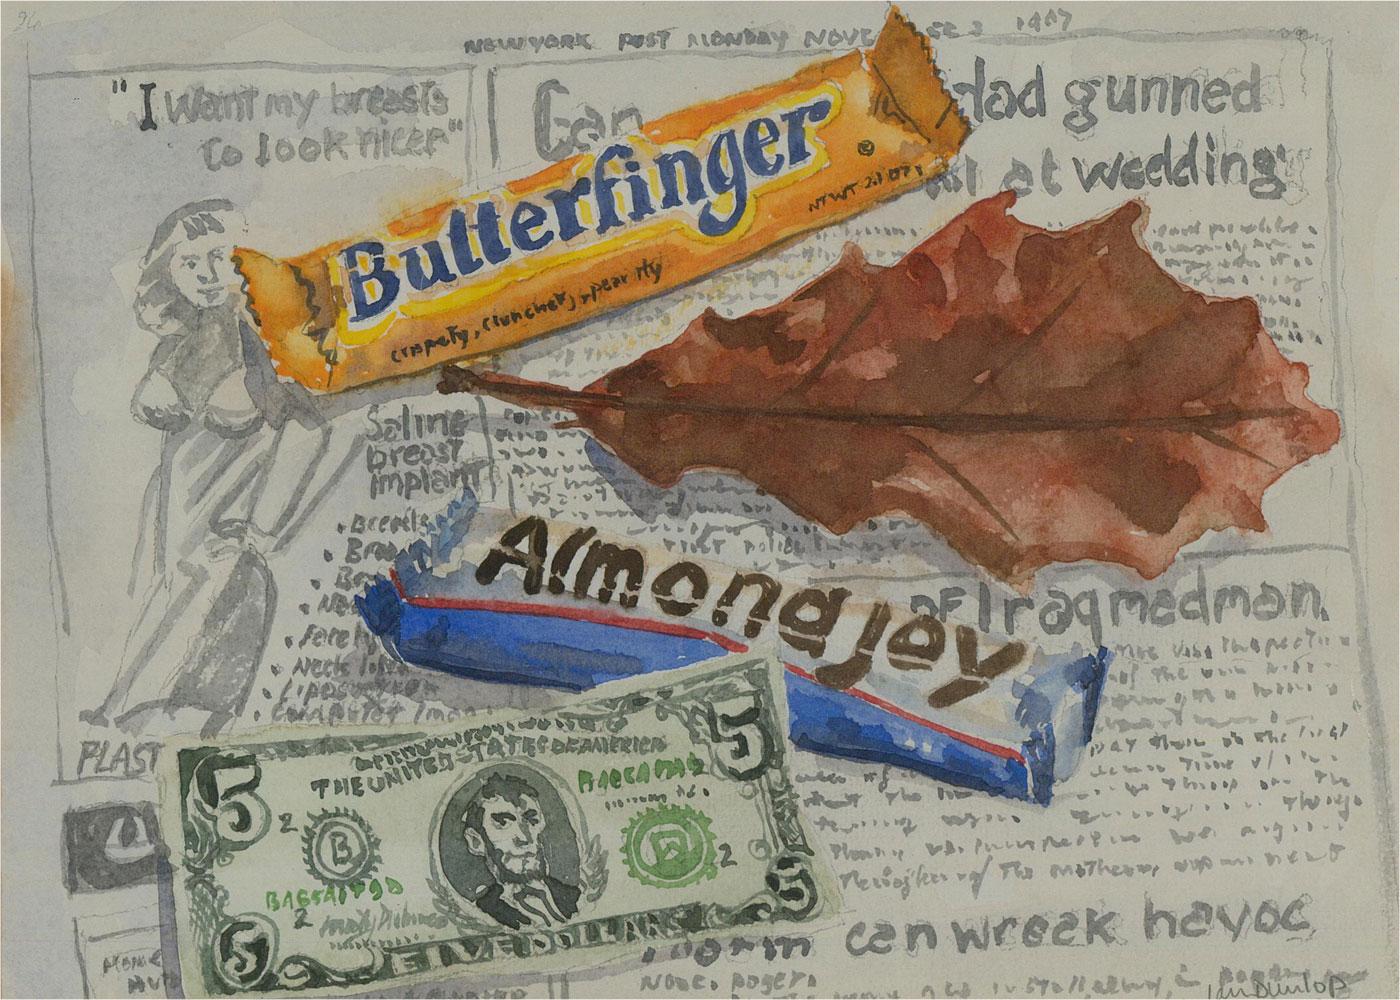 An unusual and eye catching still life showing candy bars, a $5 bill and brown leaf, lying on a newspaper filled with disturbing and saddening slogans and headlines. The artist has signed to the lower right corner and the painting has been presented